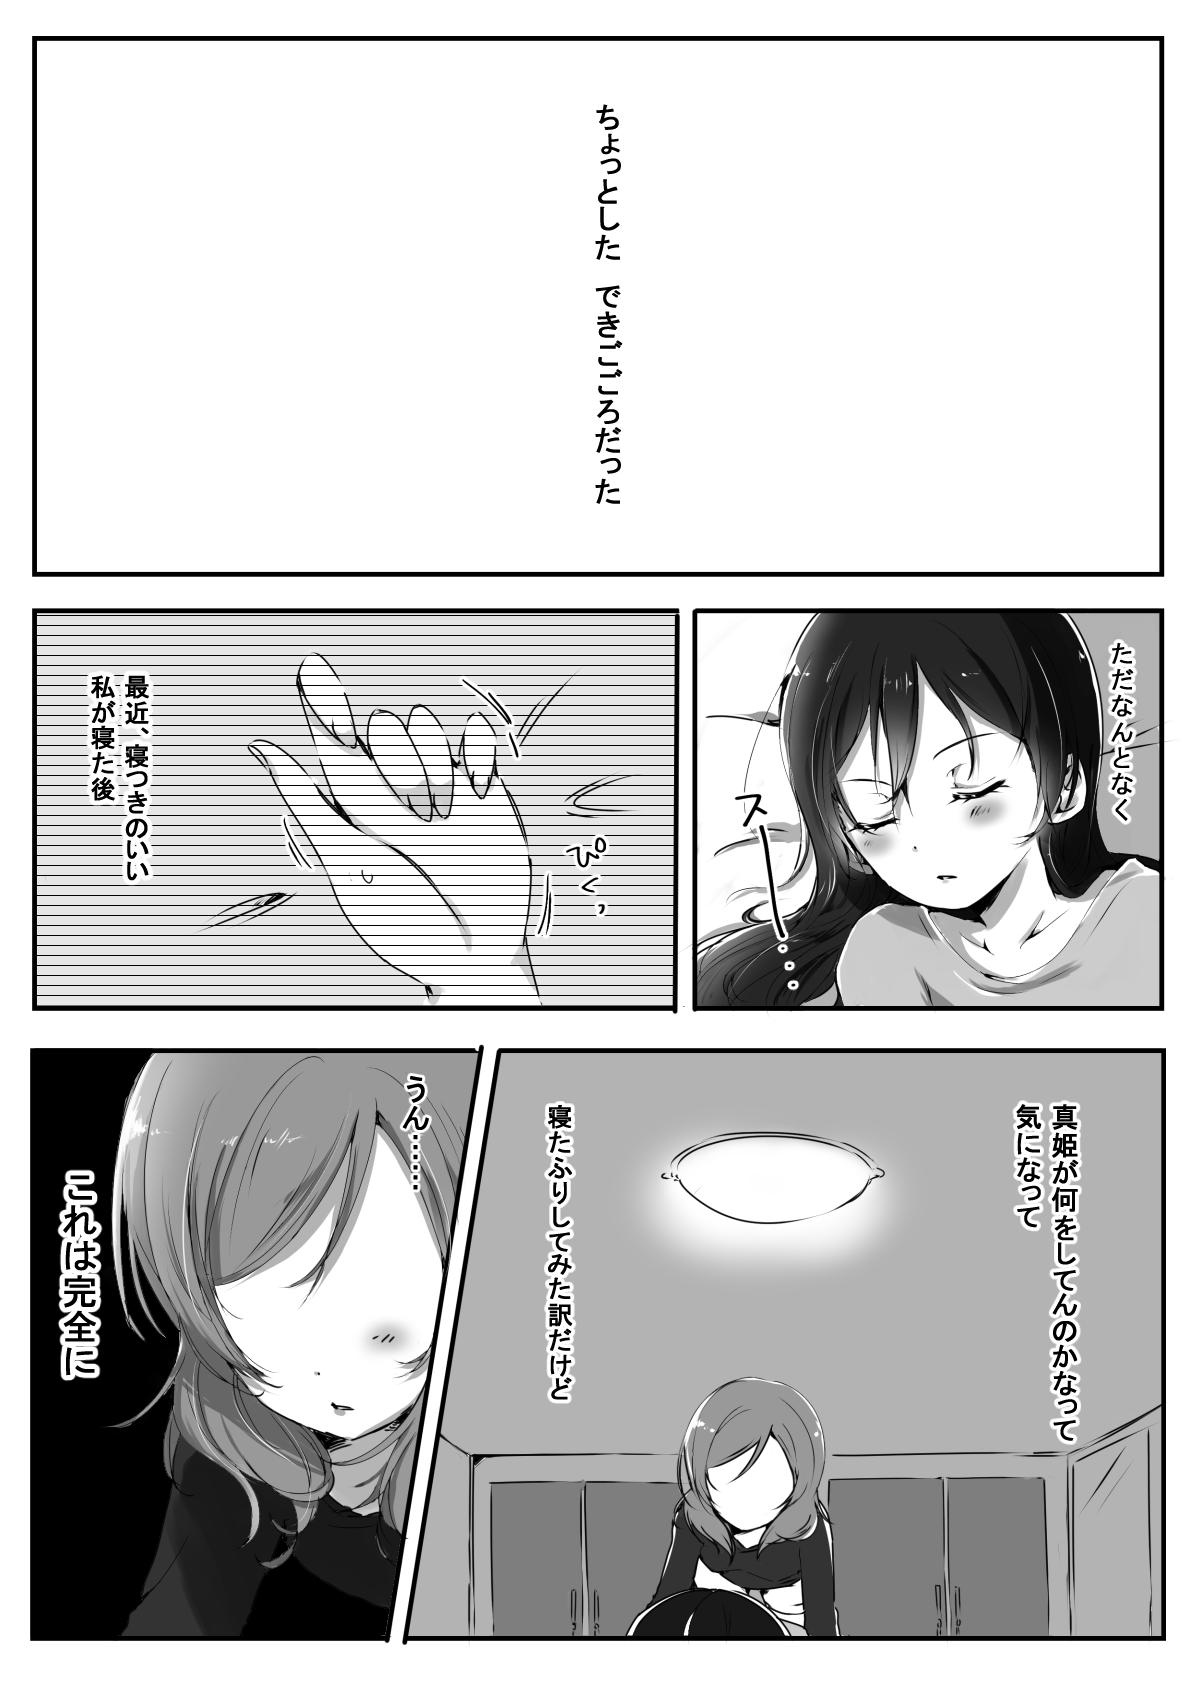 Fantasy Massage Kanojo - Love live Mexican - Page 2